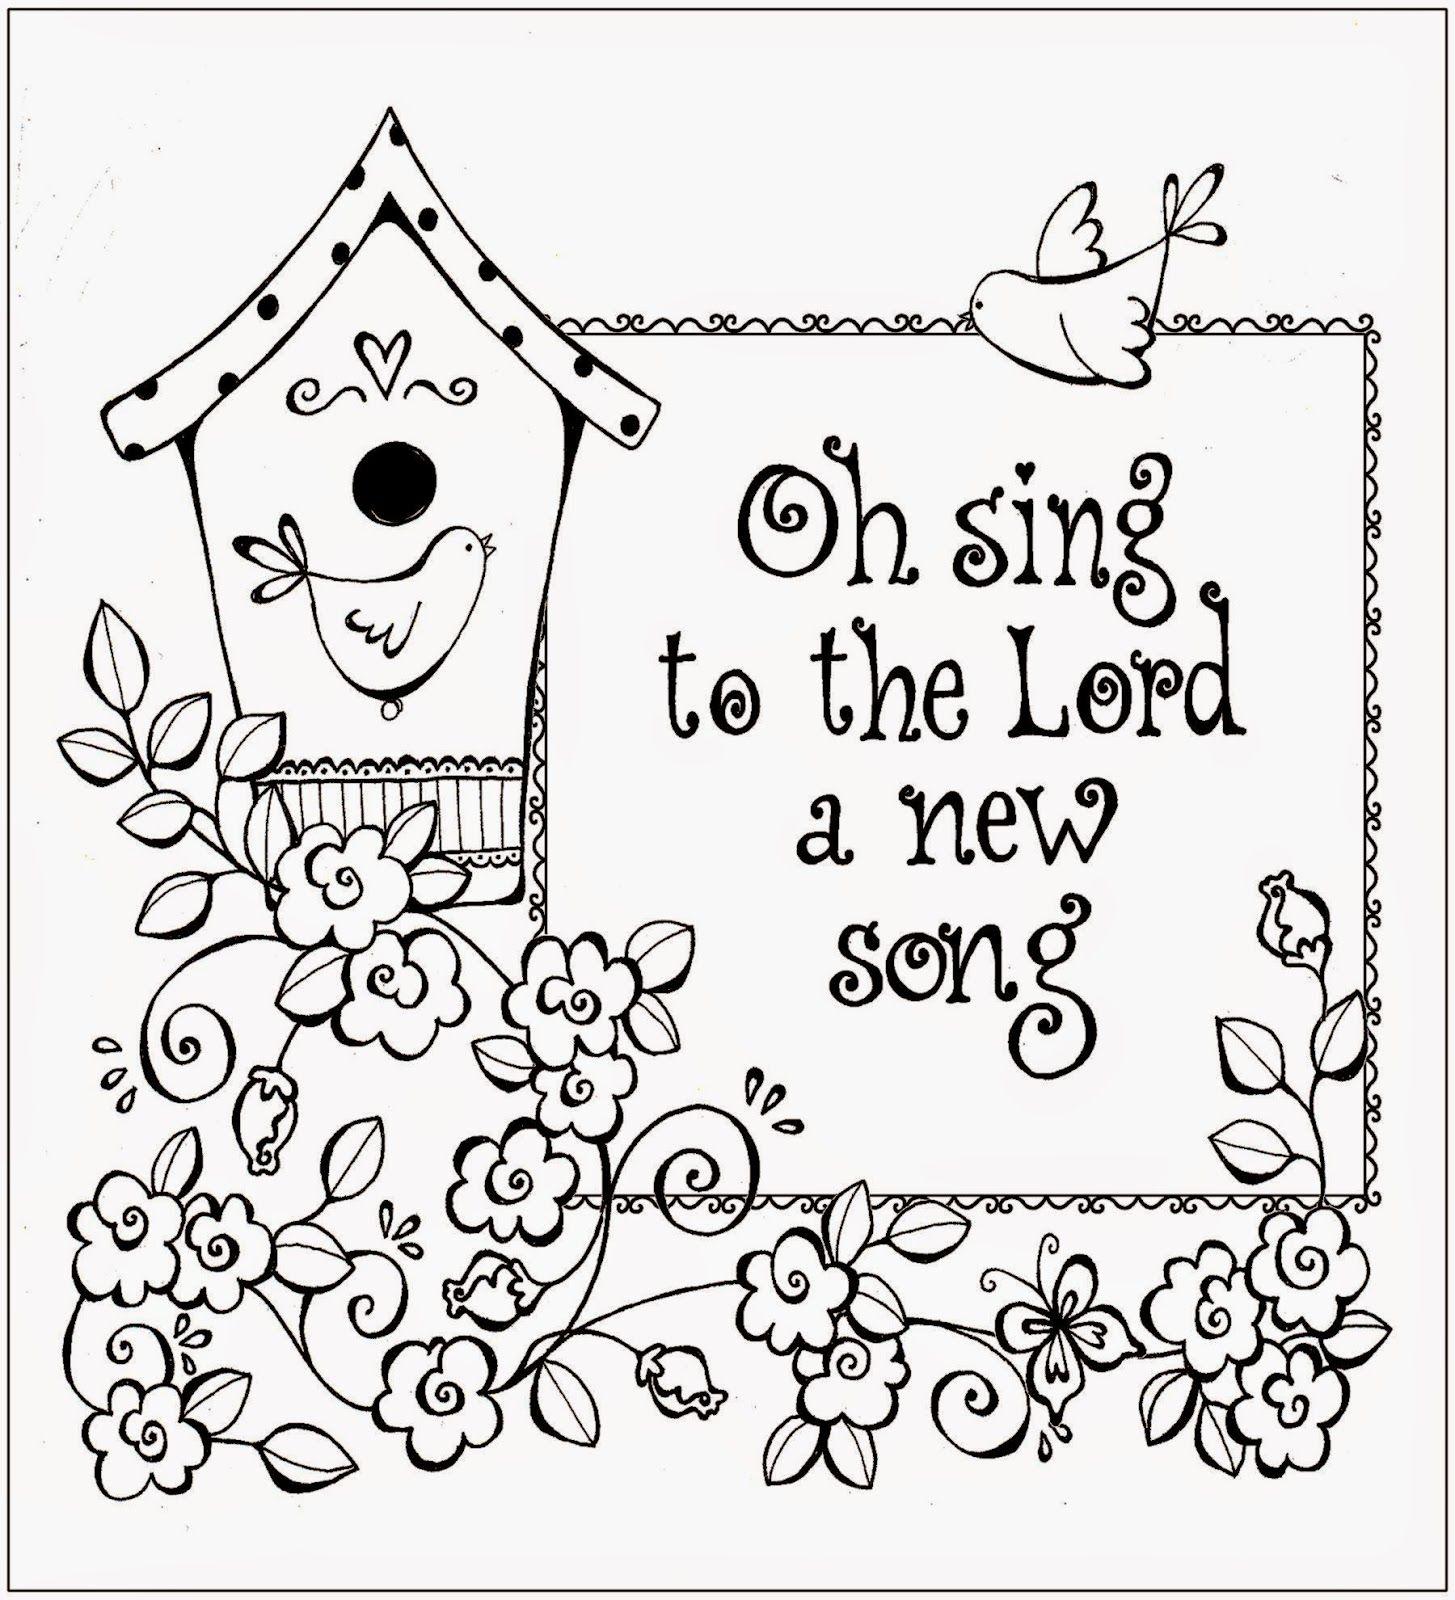 Sunday School Coloring Pages | Free Coloring Sheet